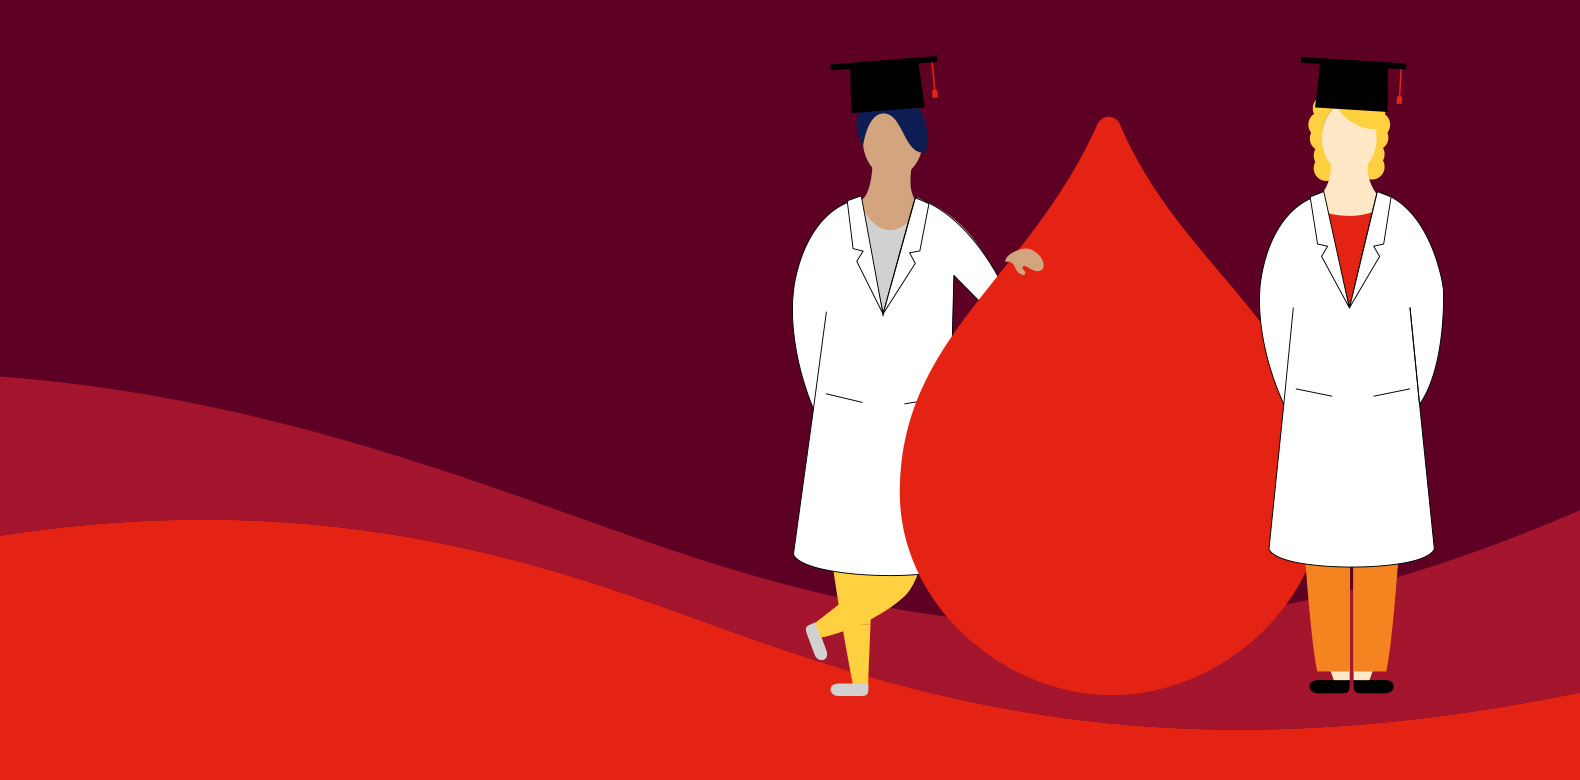 illustration of two scientists standing next to a big red blood drop in front of an orange and red backdrop